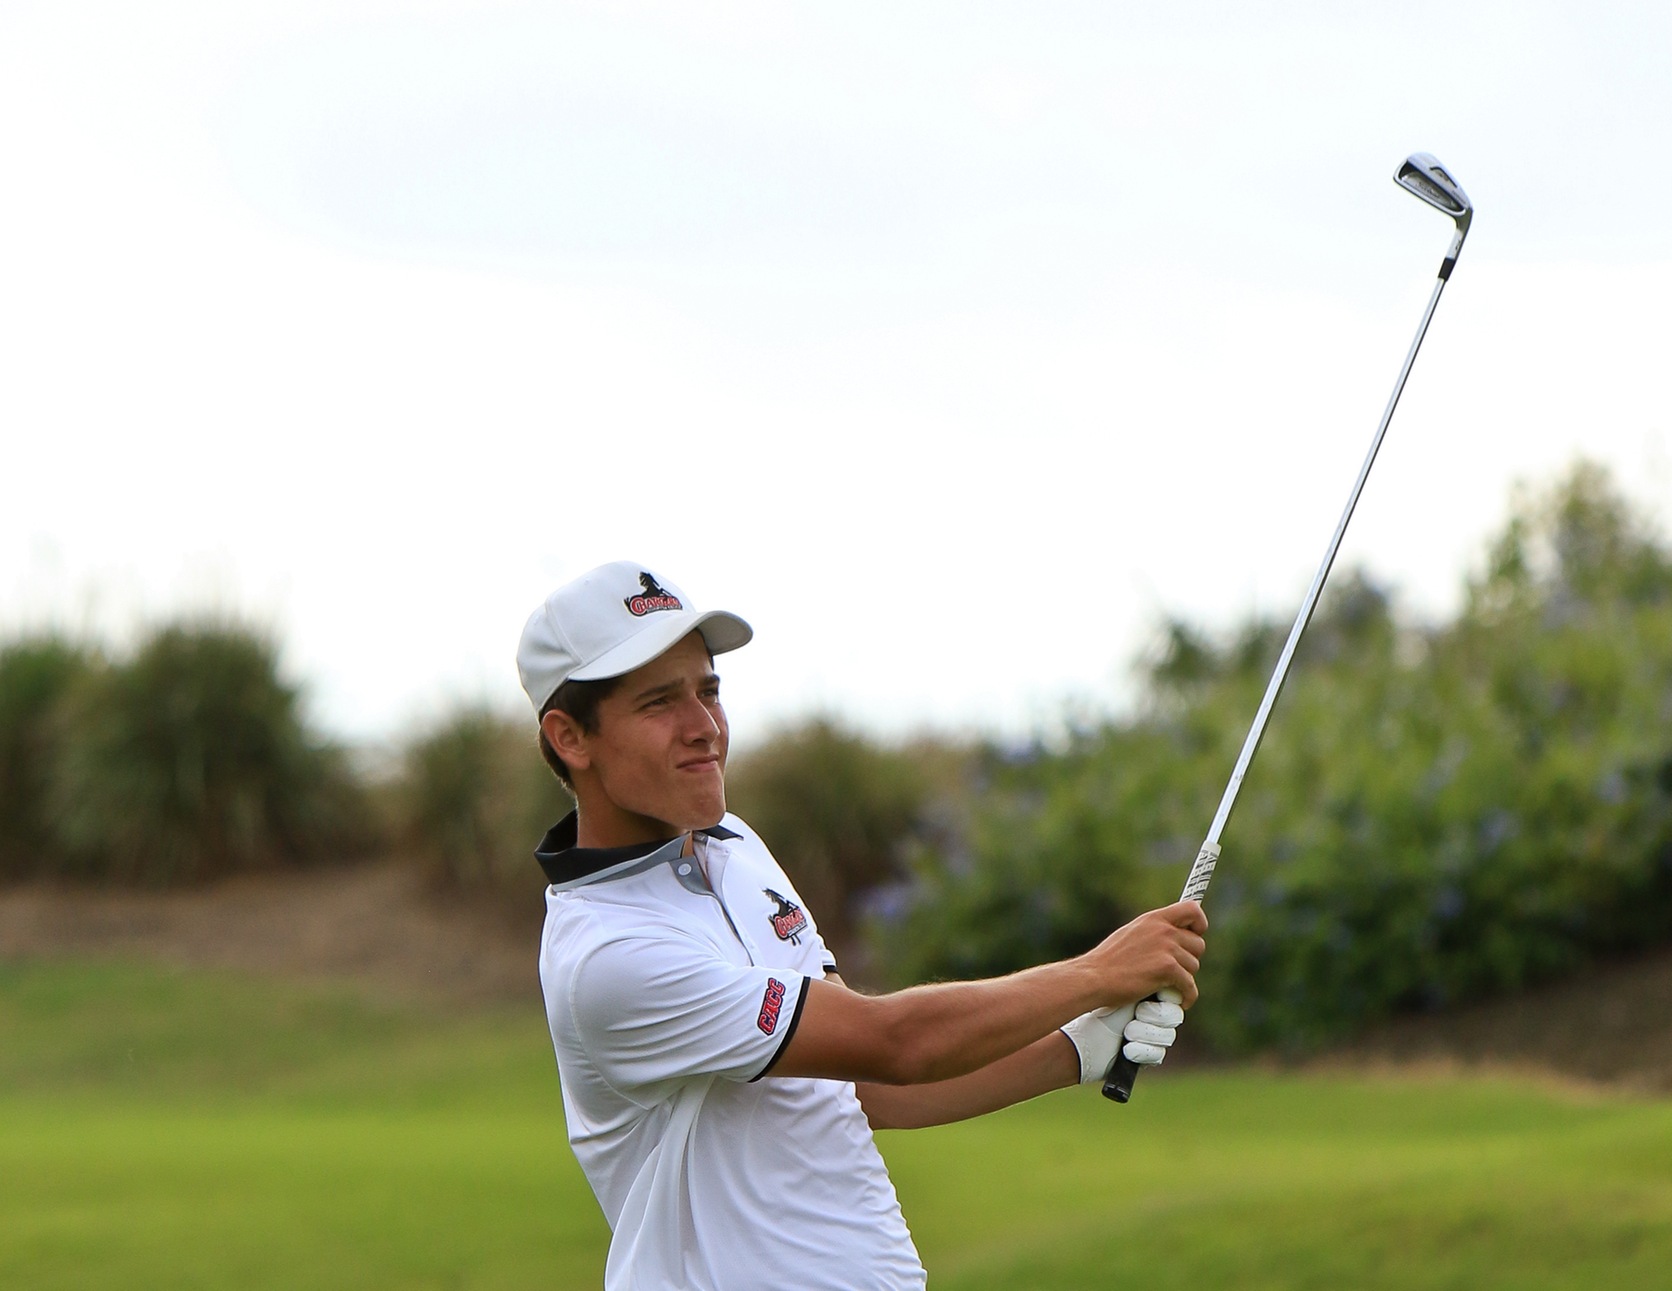 GOLF IN FIFTH PLACE AFTER ROUND ONE OF FPU INVITATIONAL